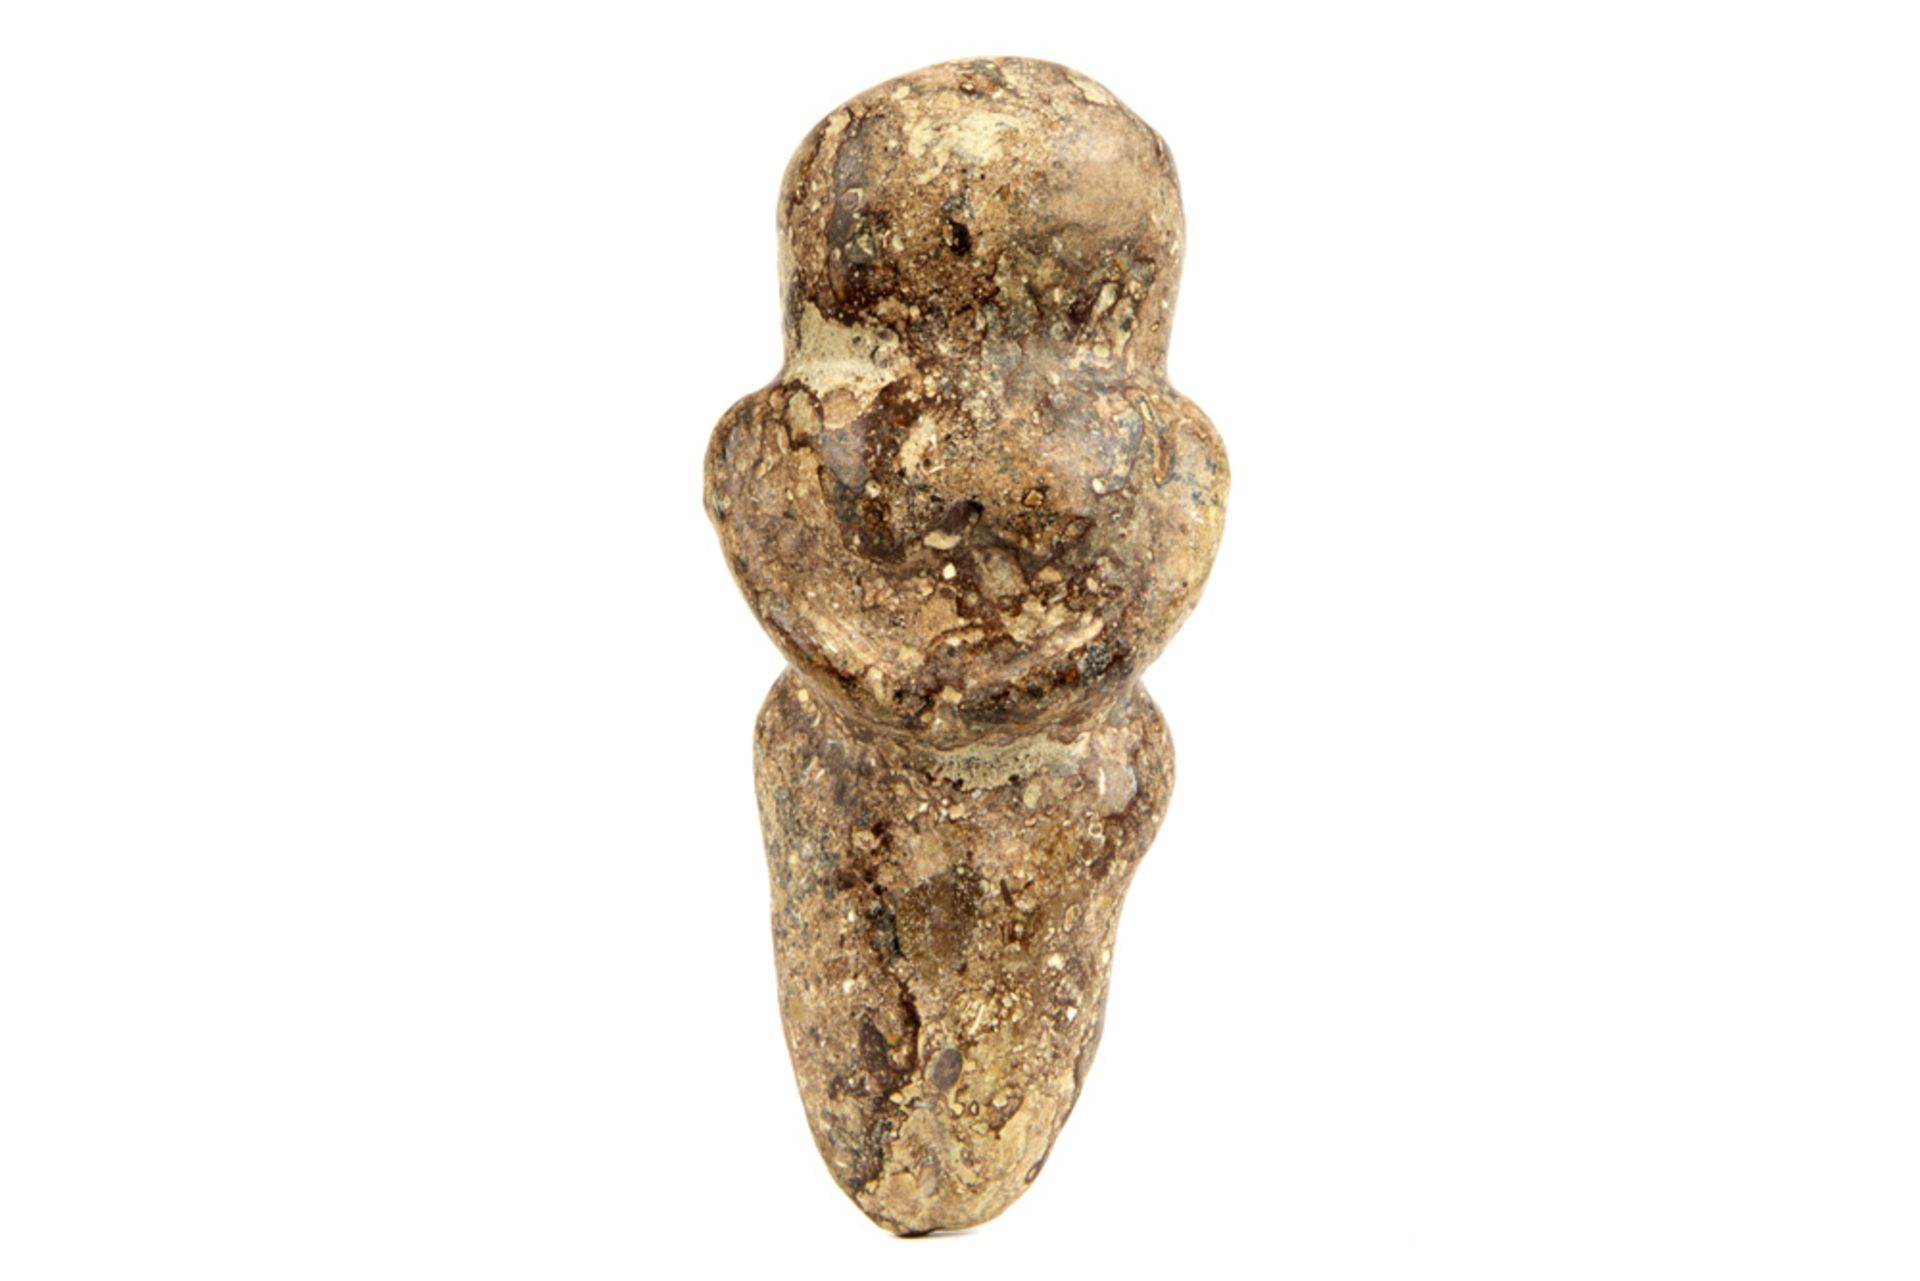 neolithical stone fertility idol with a typical stylised female shape || Neolitisch